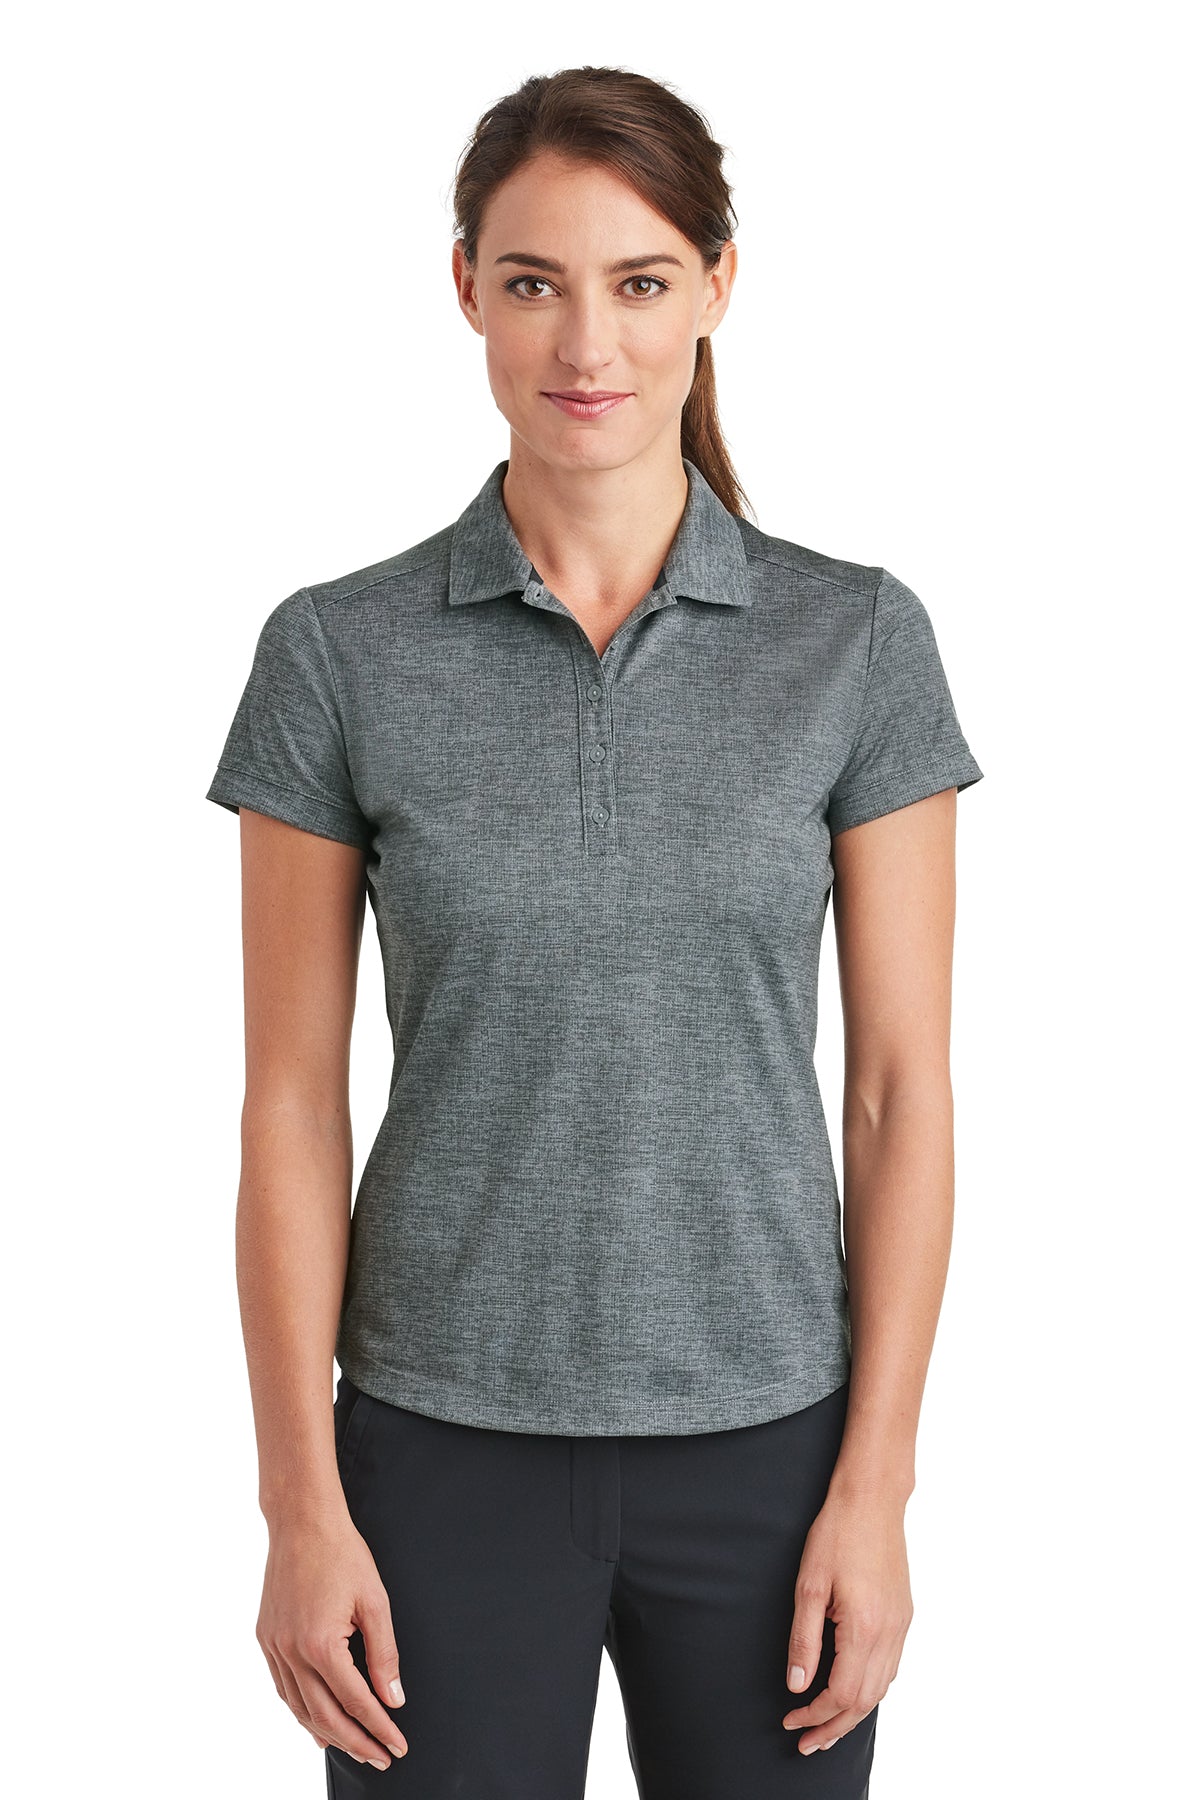 Buy cool-grey-anthracite Nike Ladies Dri-FIT Crosshatch Polo